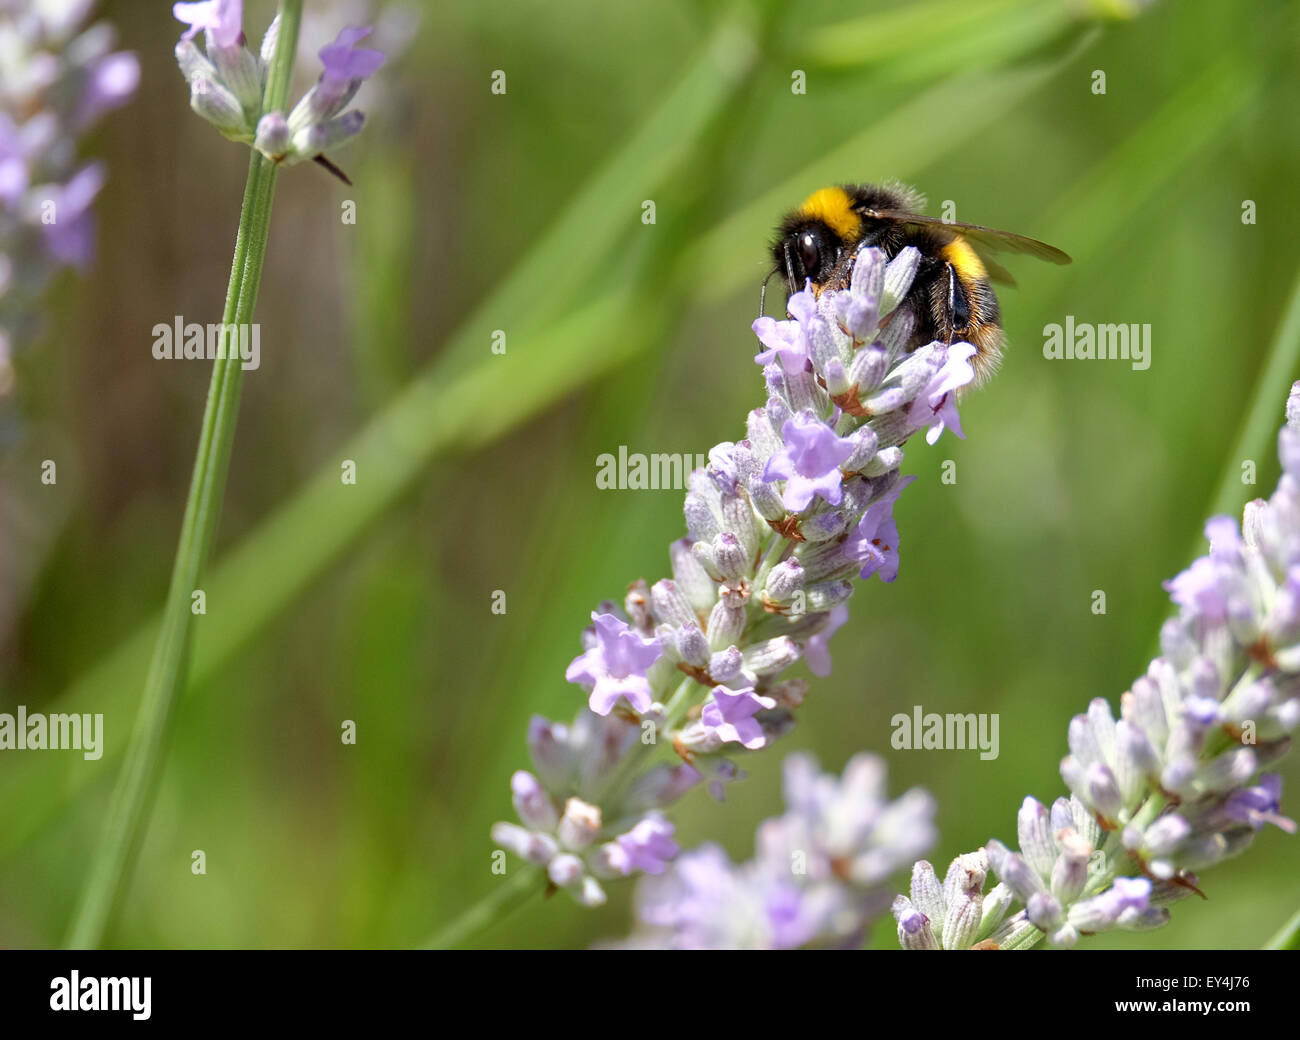 A Bumble Bee collecting pollen from a lavender flower in the UK Stock Photo